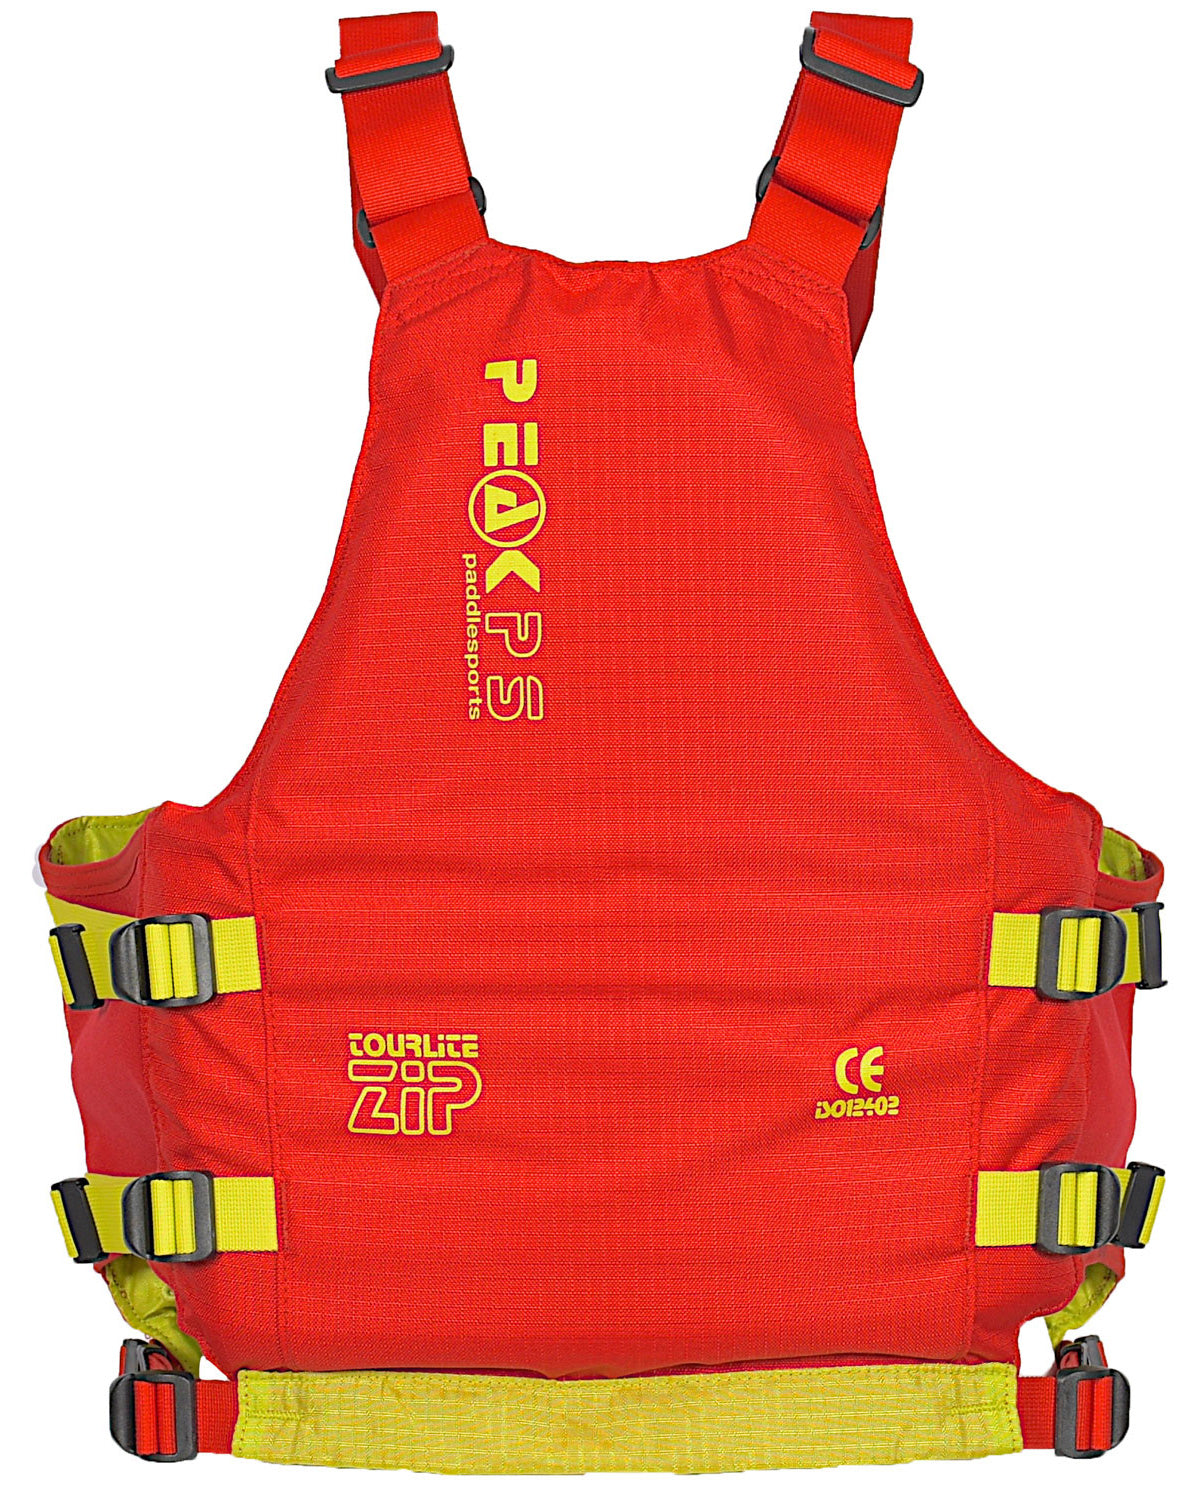 The rear of a Peak PS Tourlite buoyancy aid shown in red